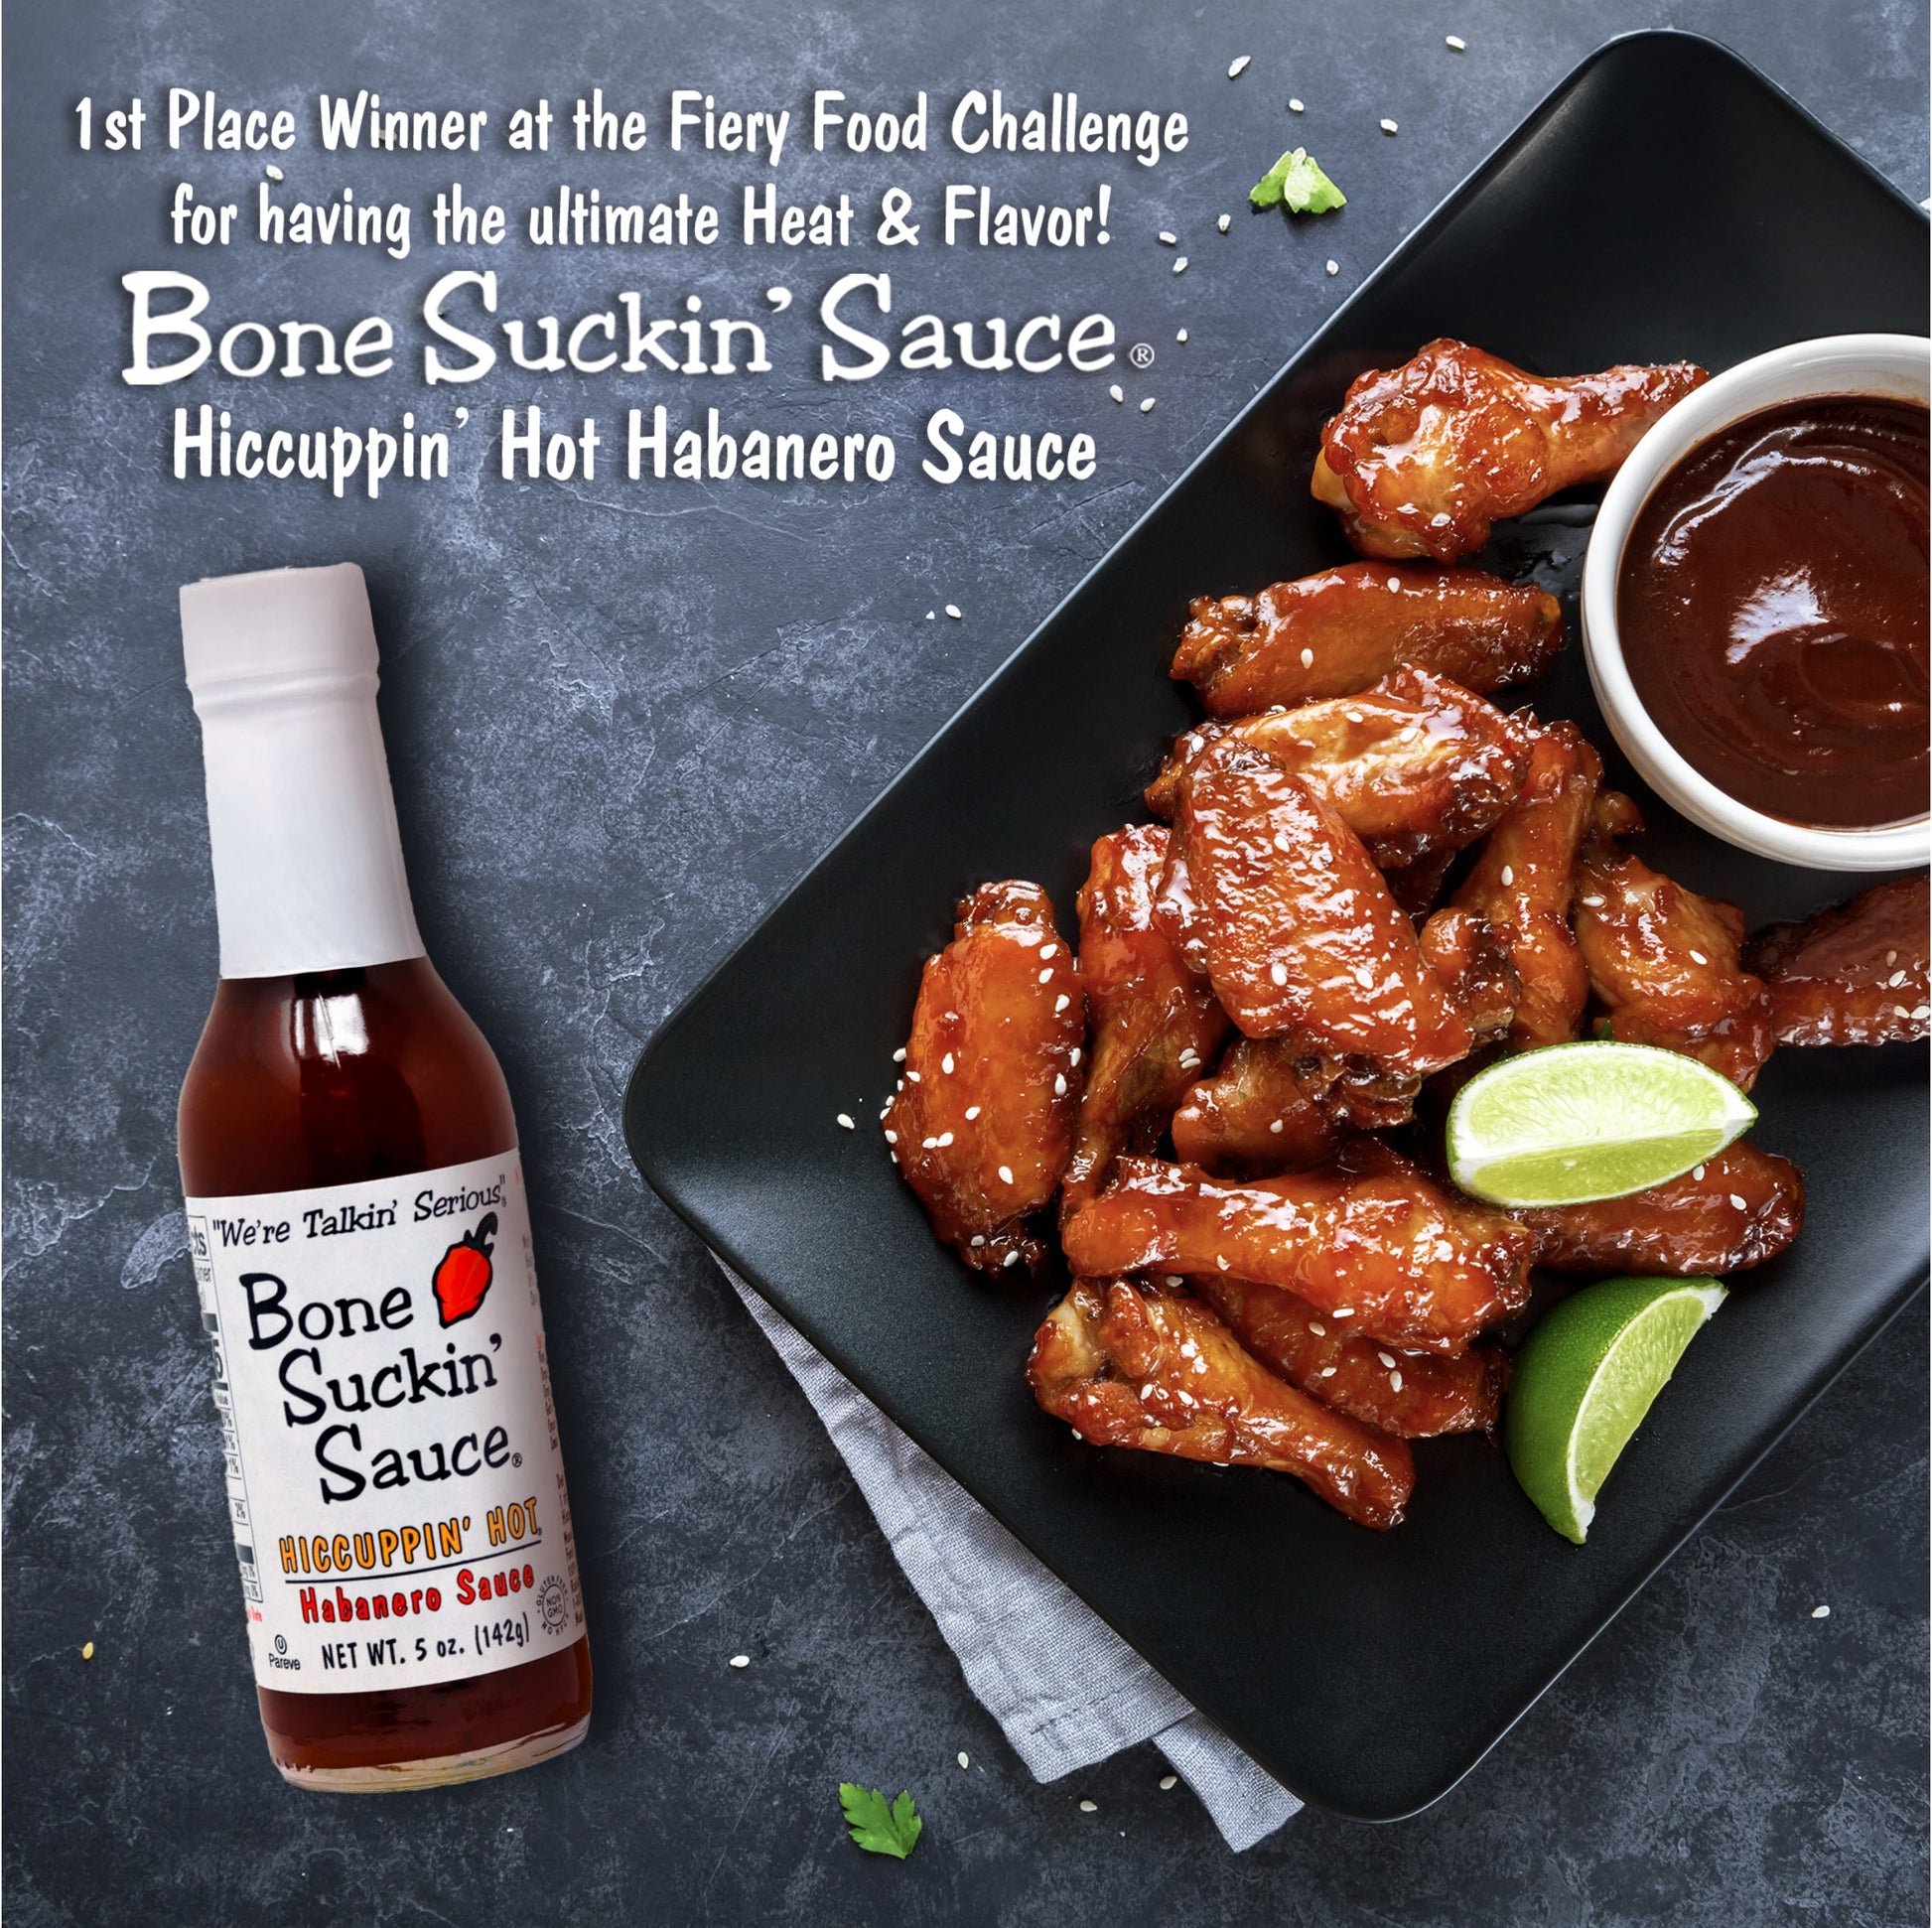 Bone Suckin'®, HICCUPPIN' Hot® Habanero Sauce 5 oz. First place winner at the Fiery Food Challenge for having the ultimate heat and flavor.